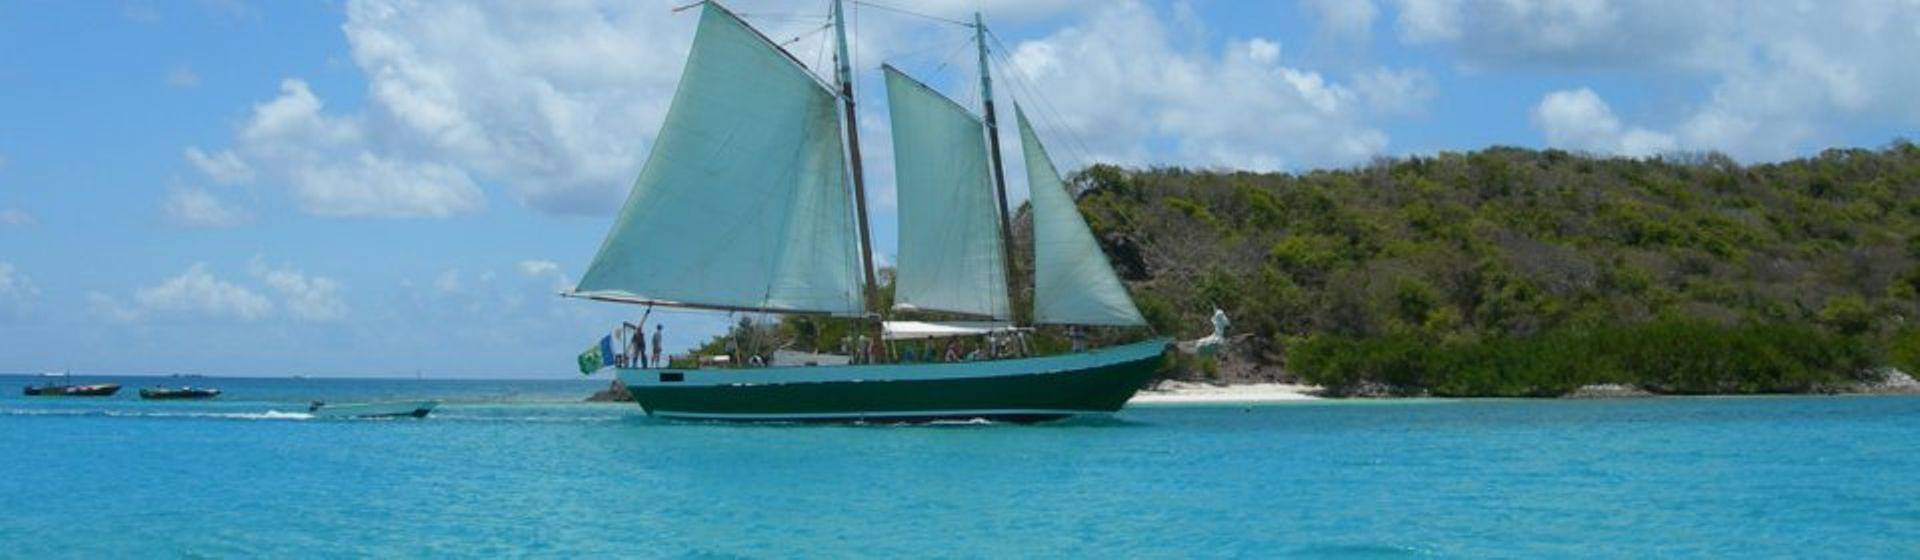 Holidays to St Vincent and the Grenadines Image